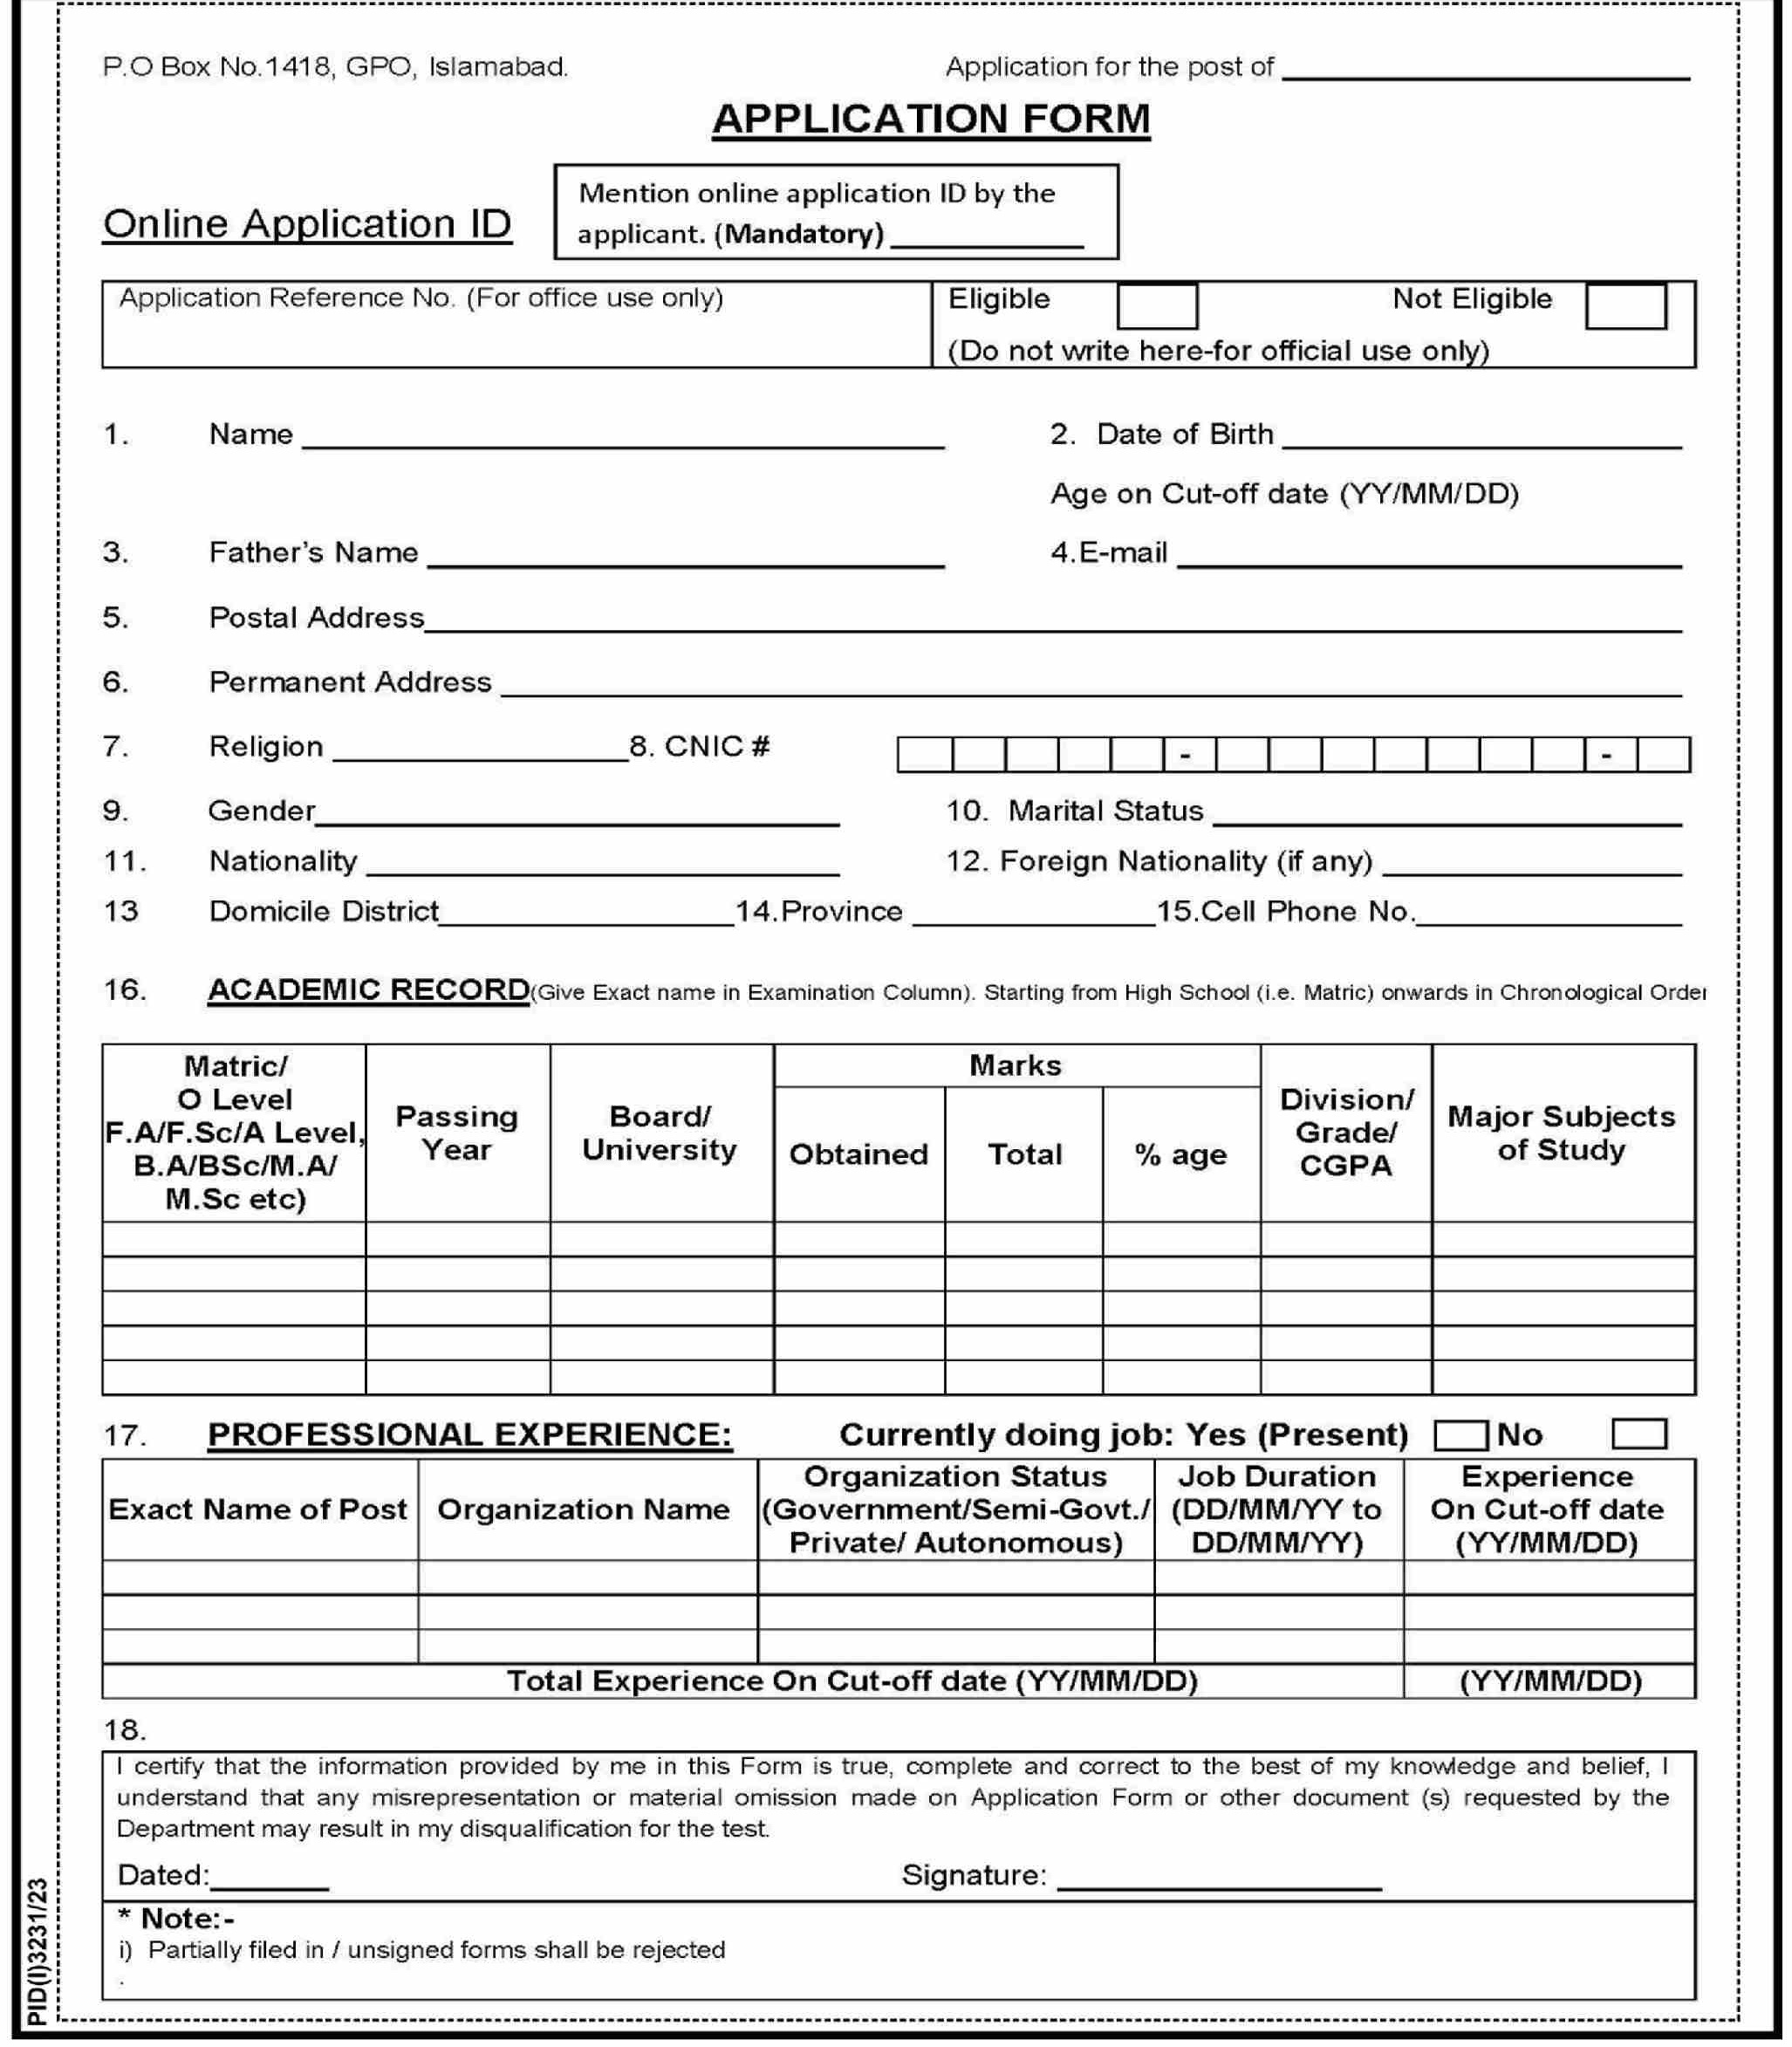 Election Commission of Pakistan Jobs in Islamabad Application Form